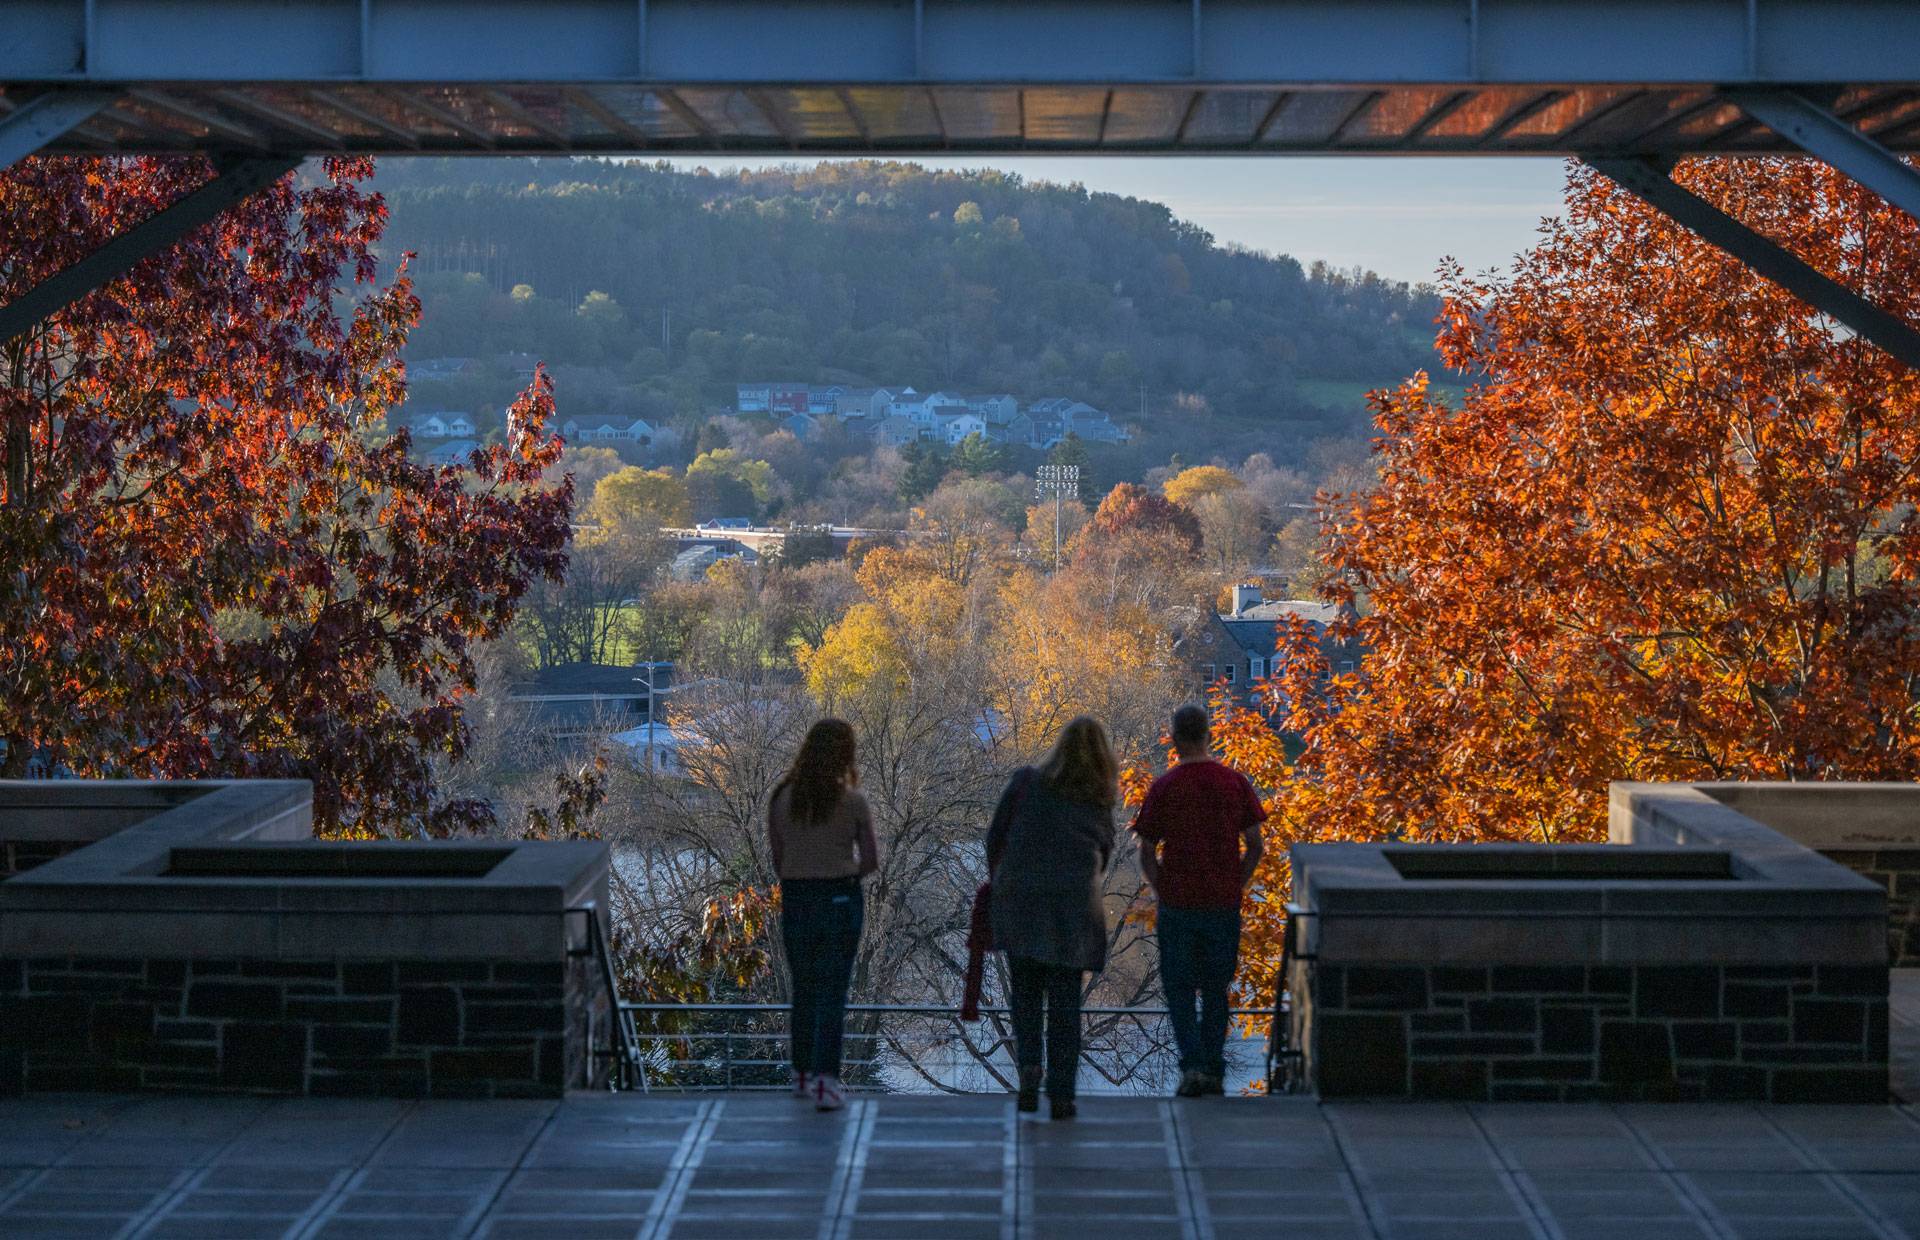 Three people at the edge of the patio under the bridge at Persson Hall, overlooking the lower campus and village with the hills in the distance. Trees in fall color are on either side of them.